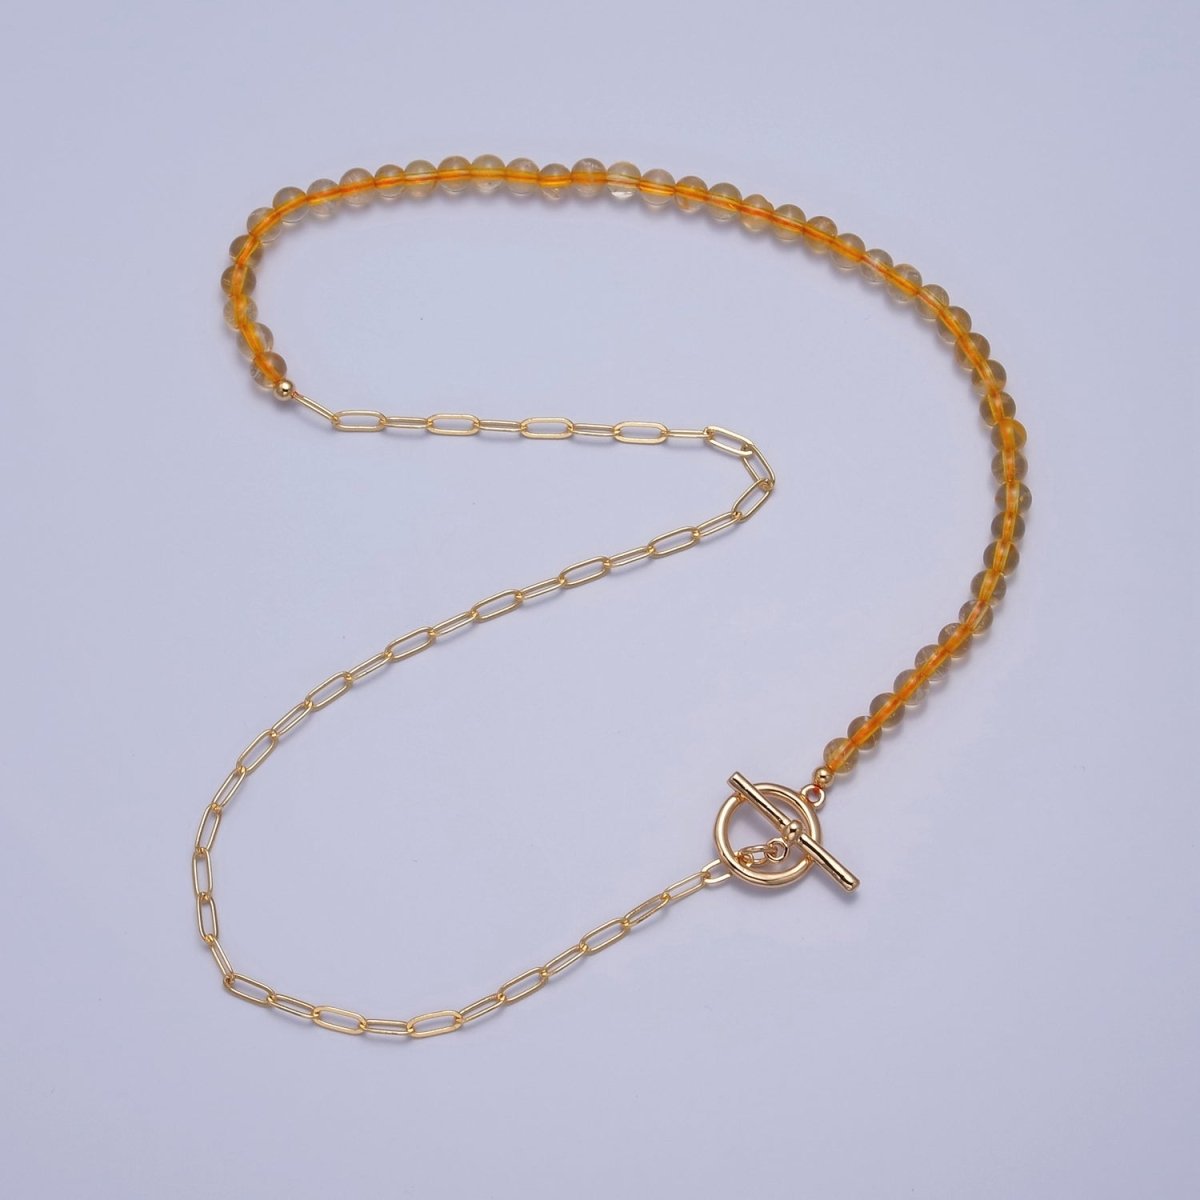 Dainty Half Bead Half Link Chain Necklace, 24k Gold Filled Paperclip Chain with Yellow Quartz Necklace | WA-963 Clearance Pricing - DLUXCA